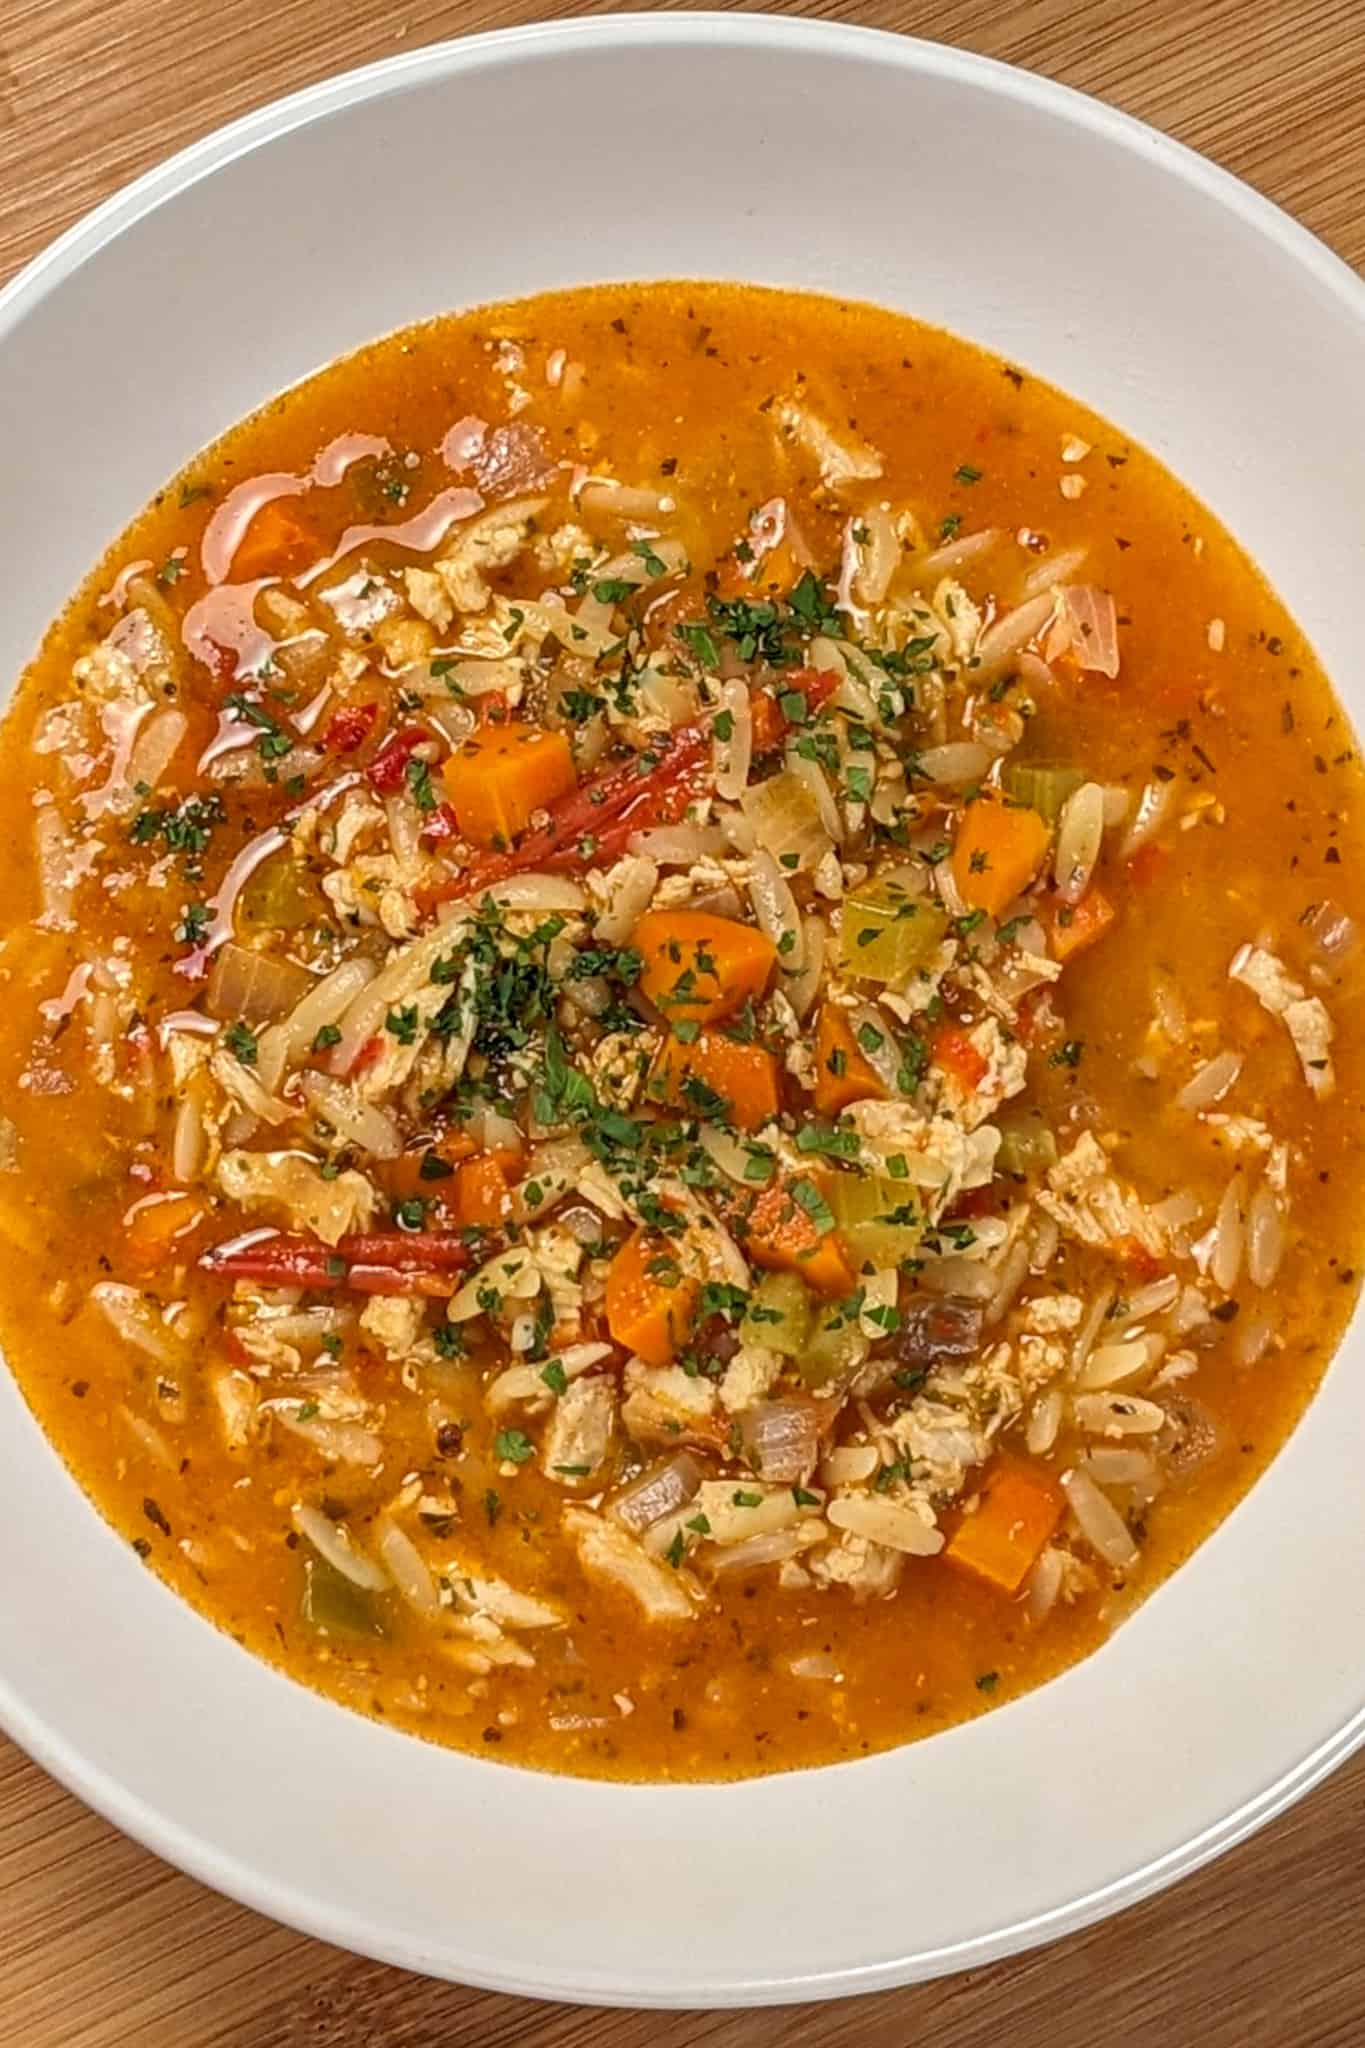 top view and close up the Lemon Calabrian Chili Chicken Orzo Soup in a wide rim bowl.